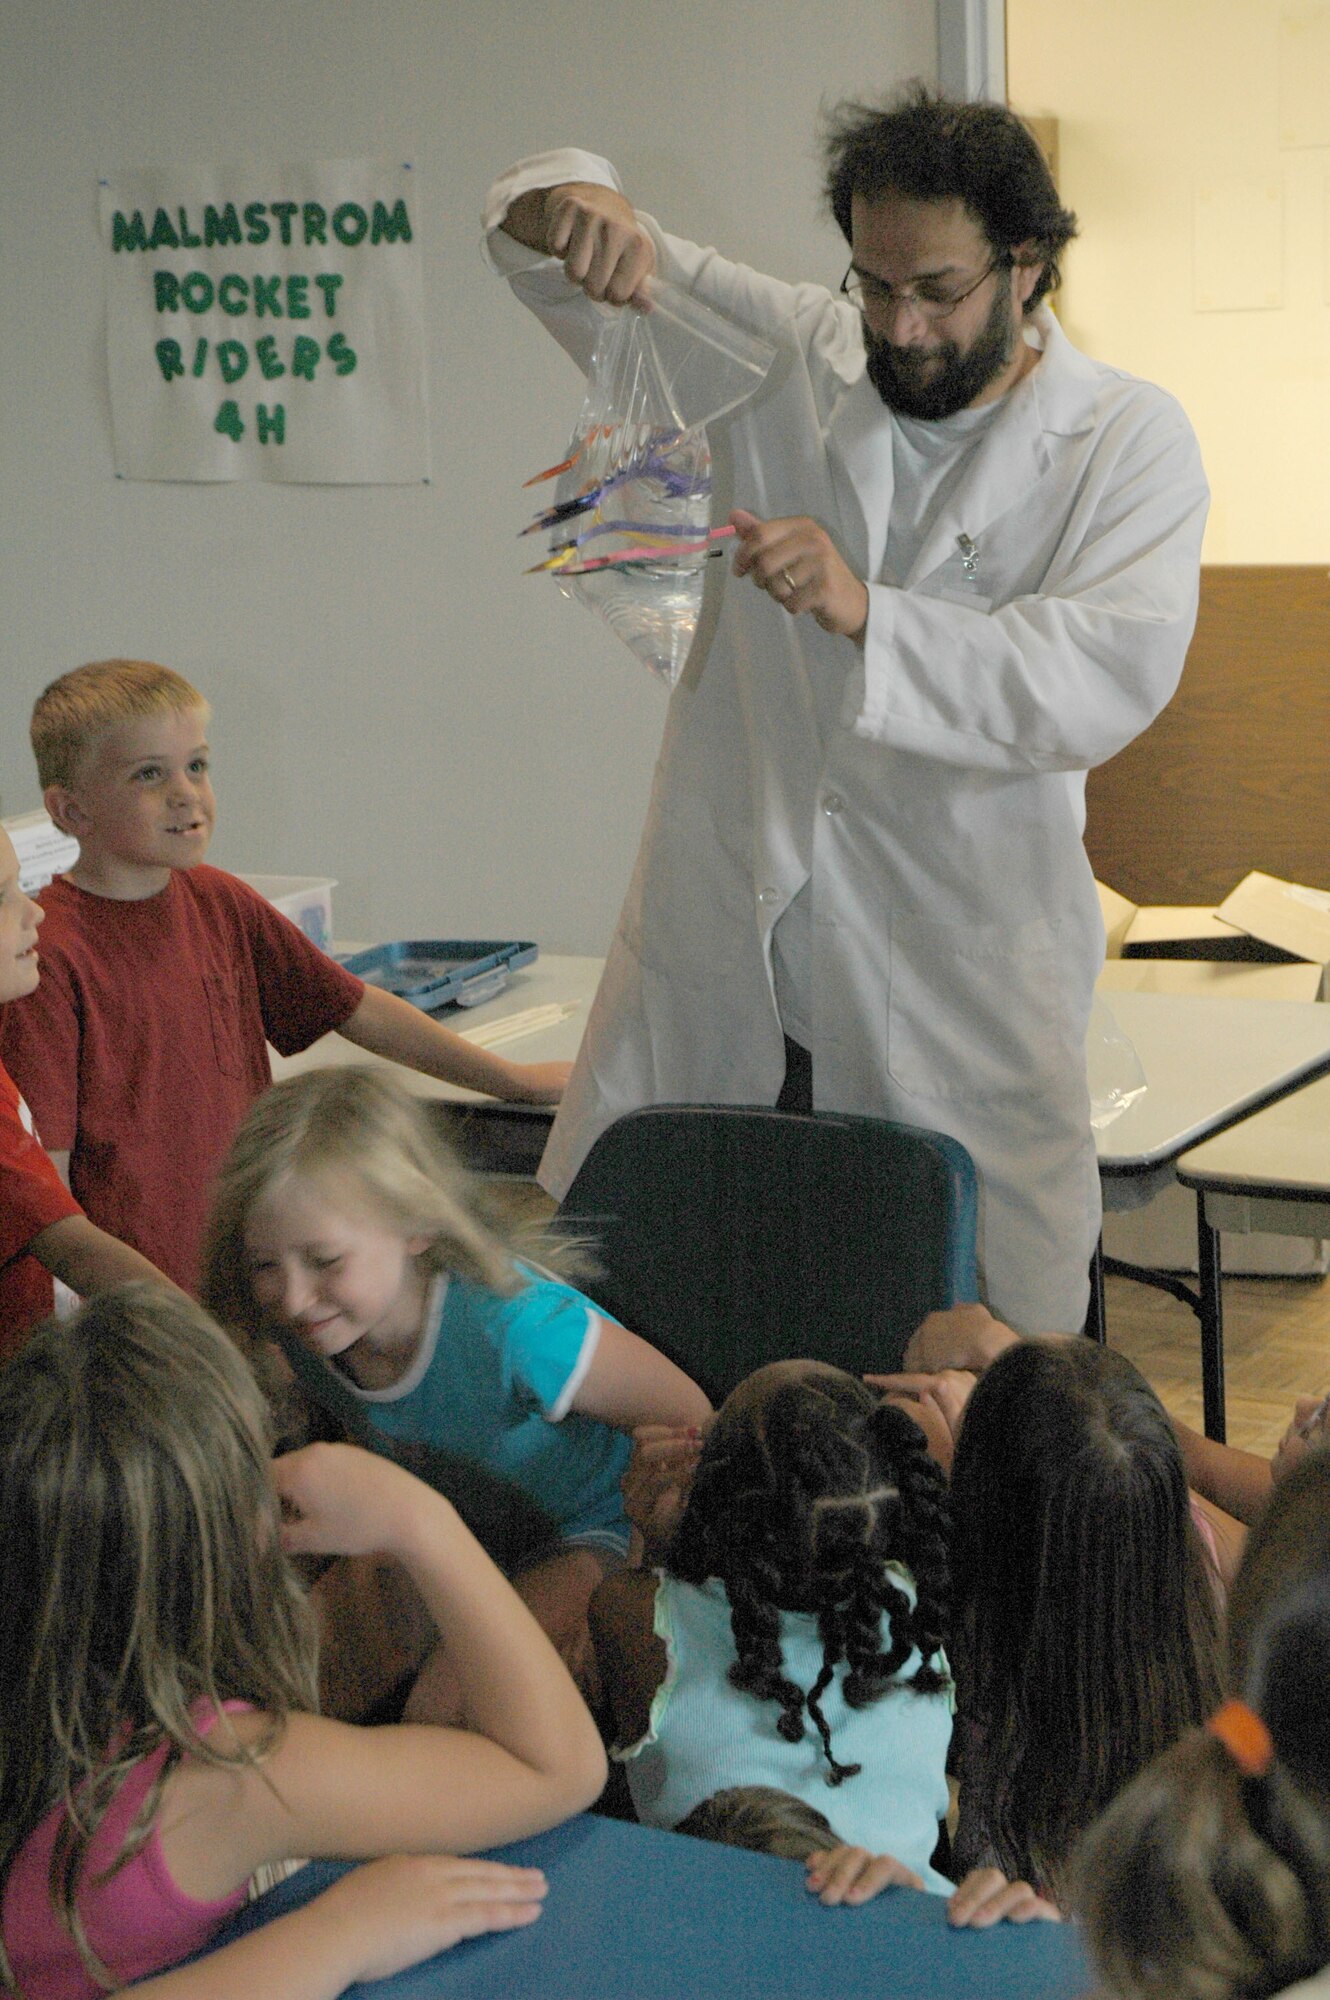 Brian Kinghorn holds a plastic bag pierced by pencils over Little Warrior Katie, 8 at the Malmstrom Youth Program Center "Gizmos, Gadgets and Goop" science fair Aug. 13 to 17. The class focused on the characteristics of polymers, chemcial reactions and inventions through the art of science. (U.S. Air Force photo/Airman 1st Class Dillon White).